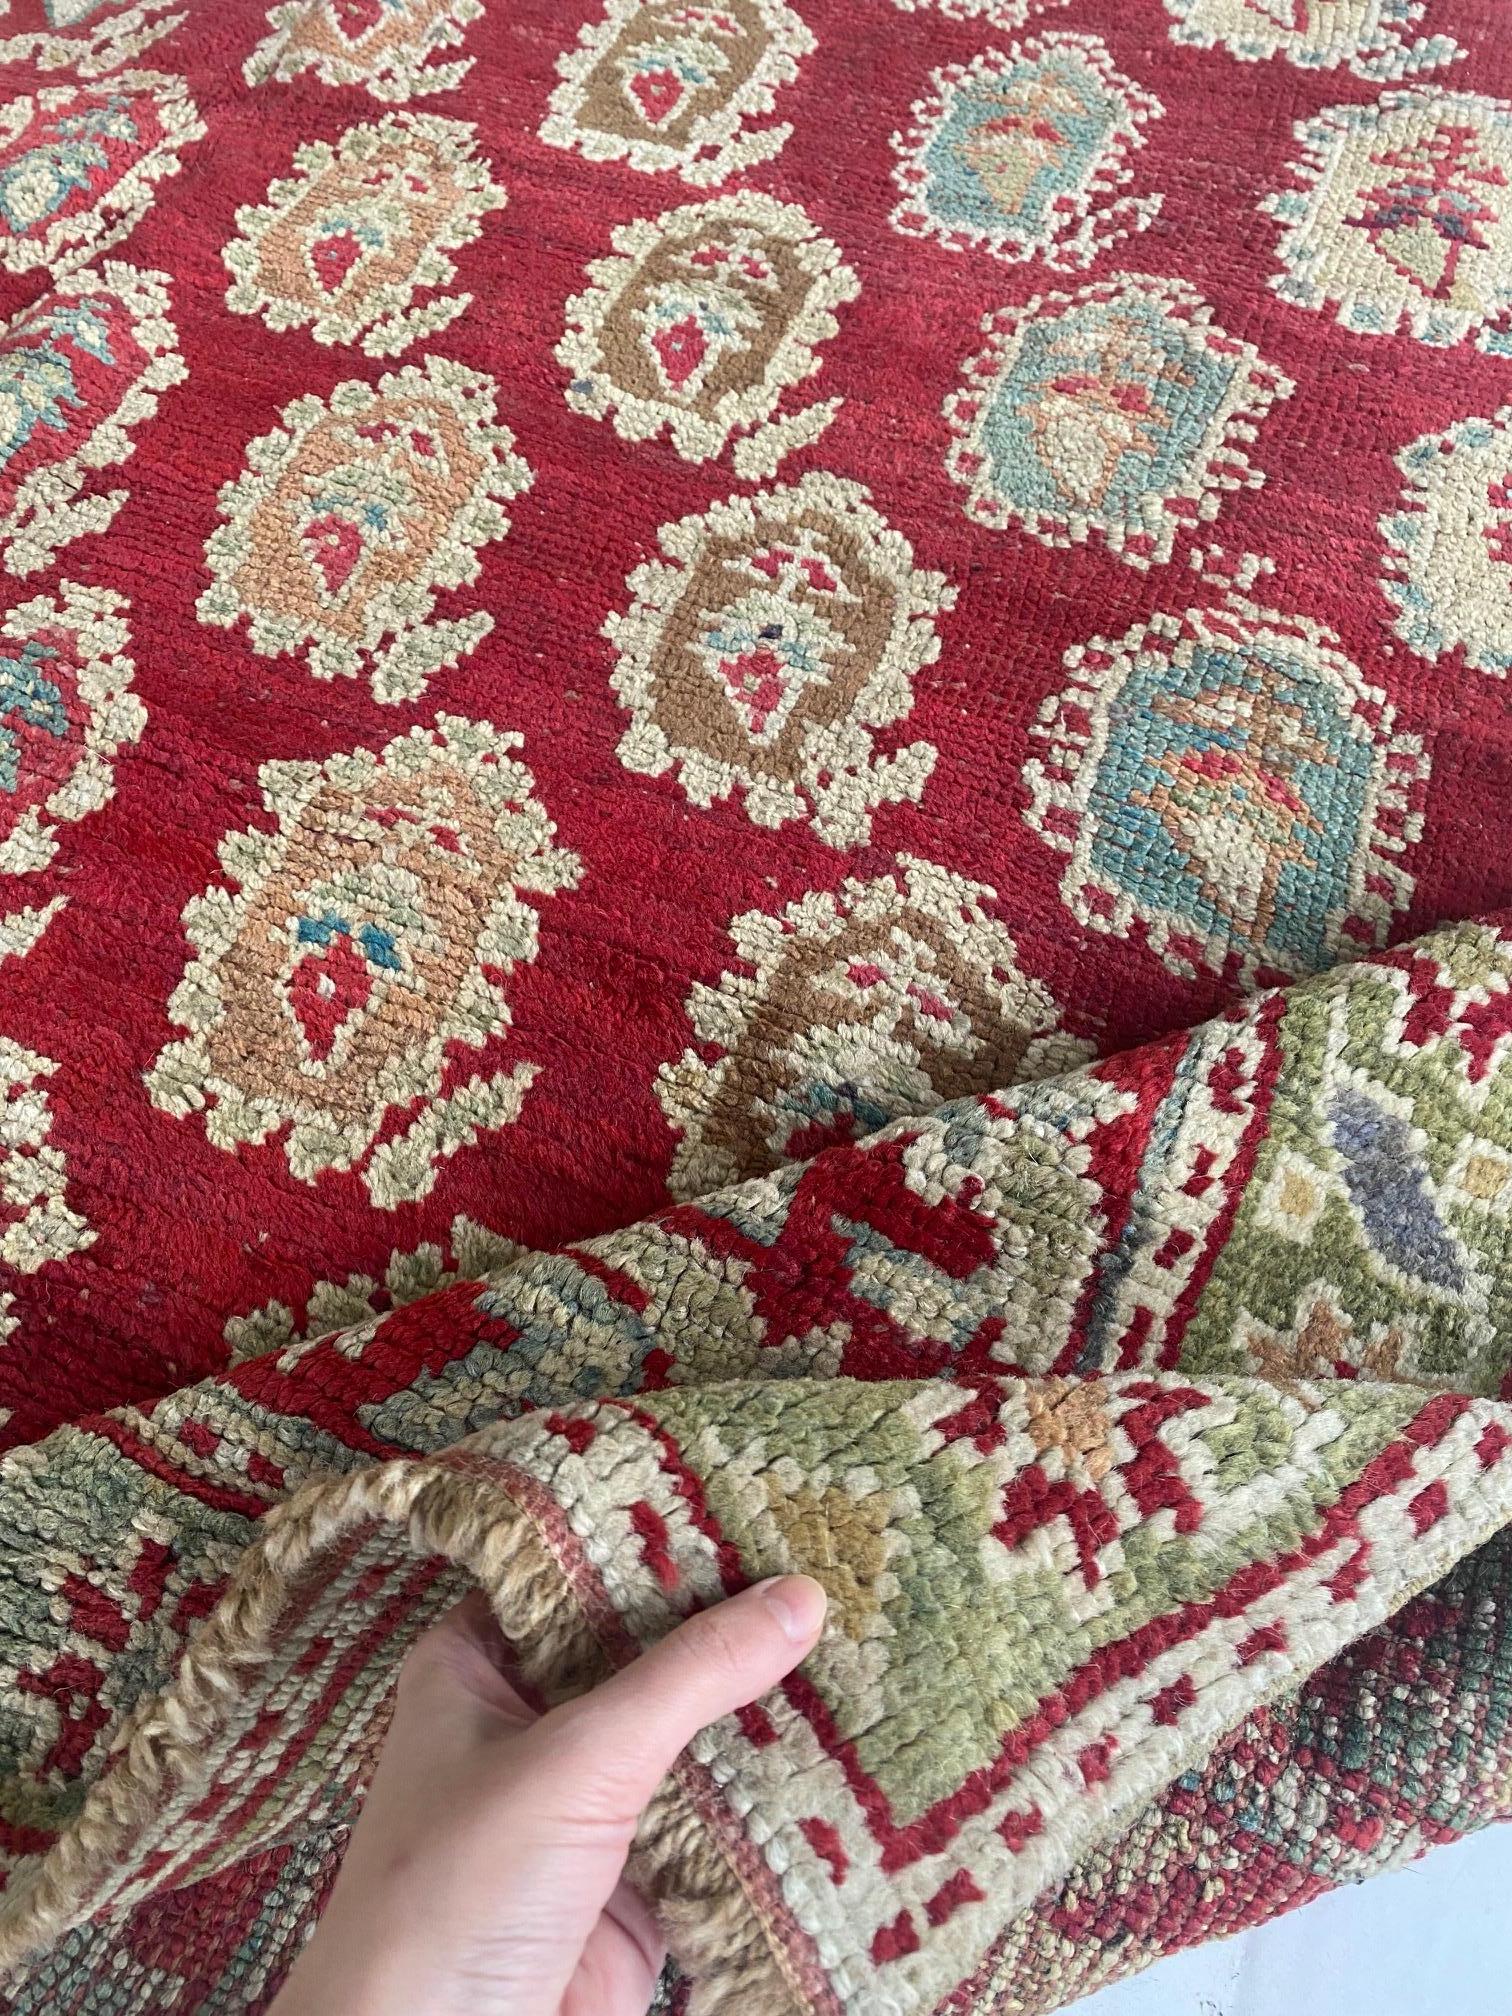 Authentic 19th century Turkish Oushak red handwoven wool carpet
Size: 12'8